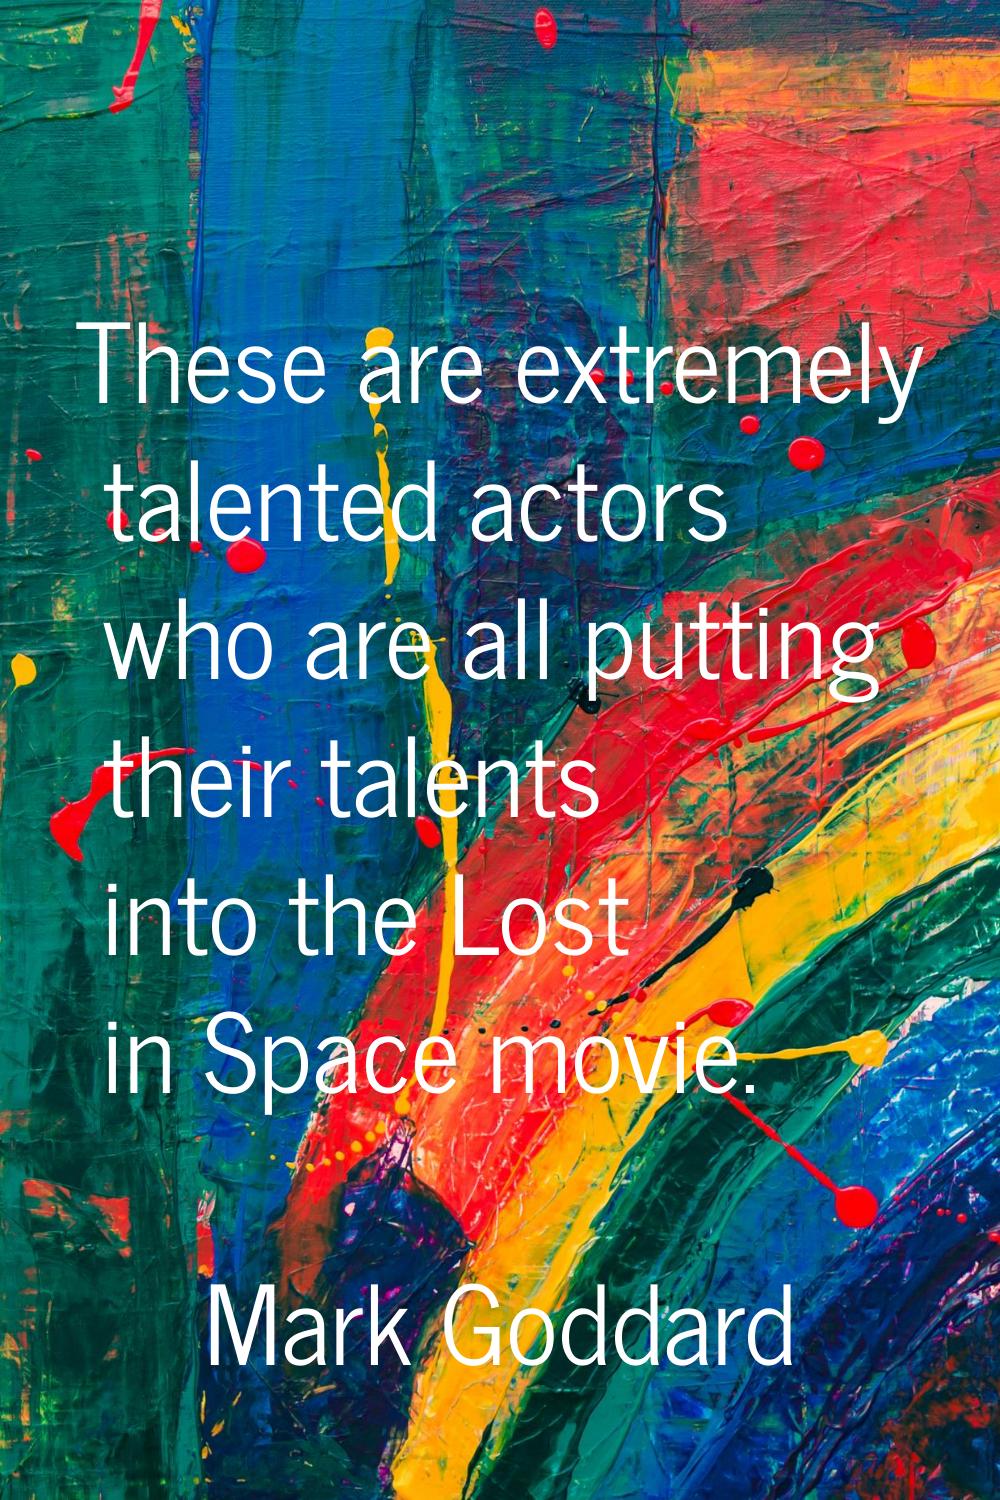 These are extremely talented actors who are all putting their talents into the Lost in Space movie.